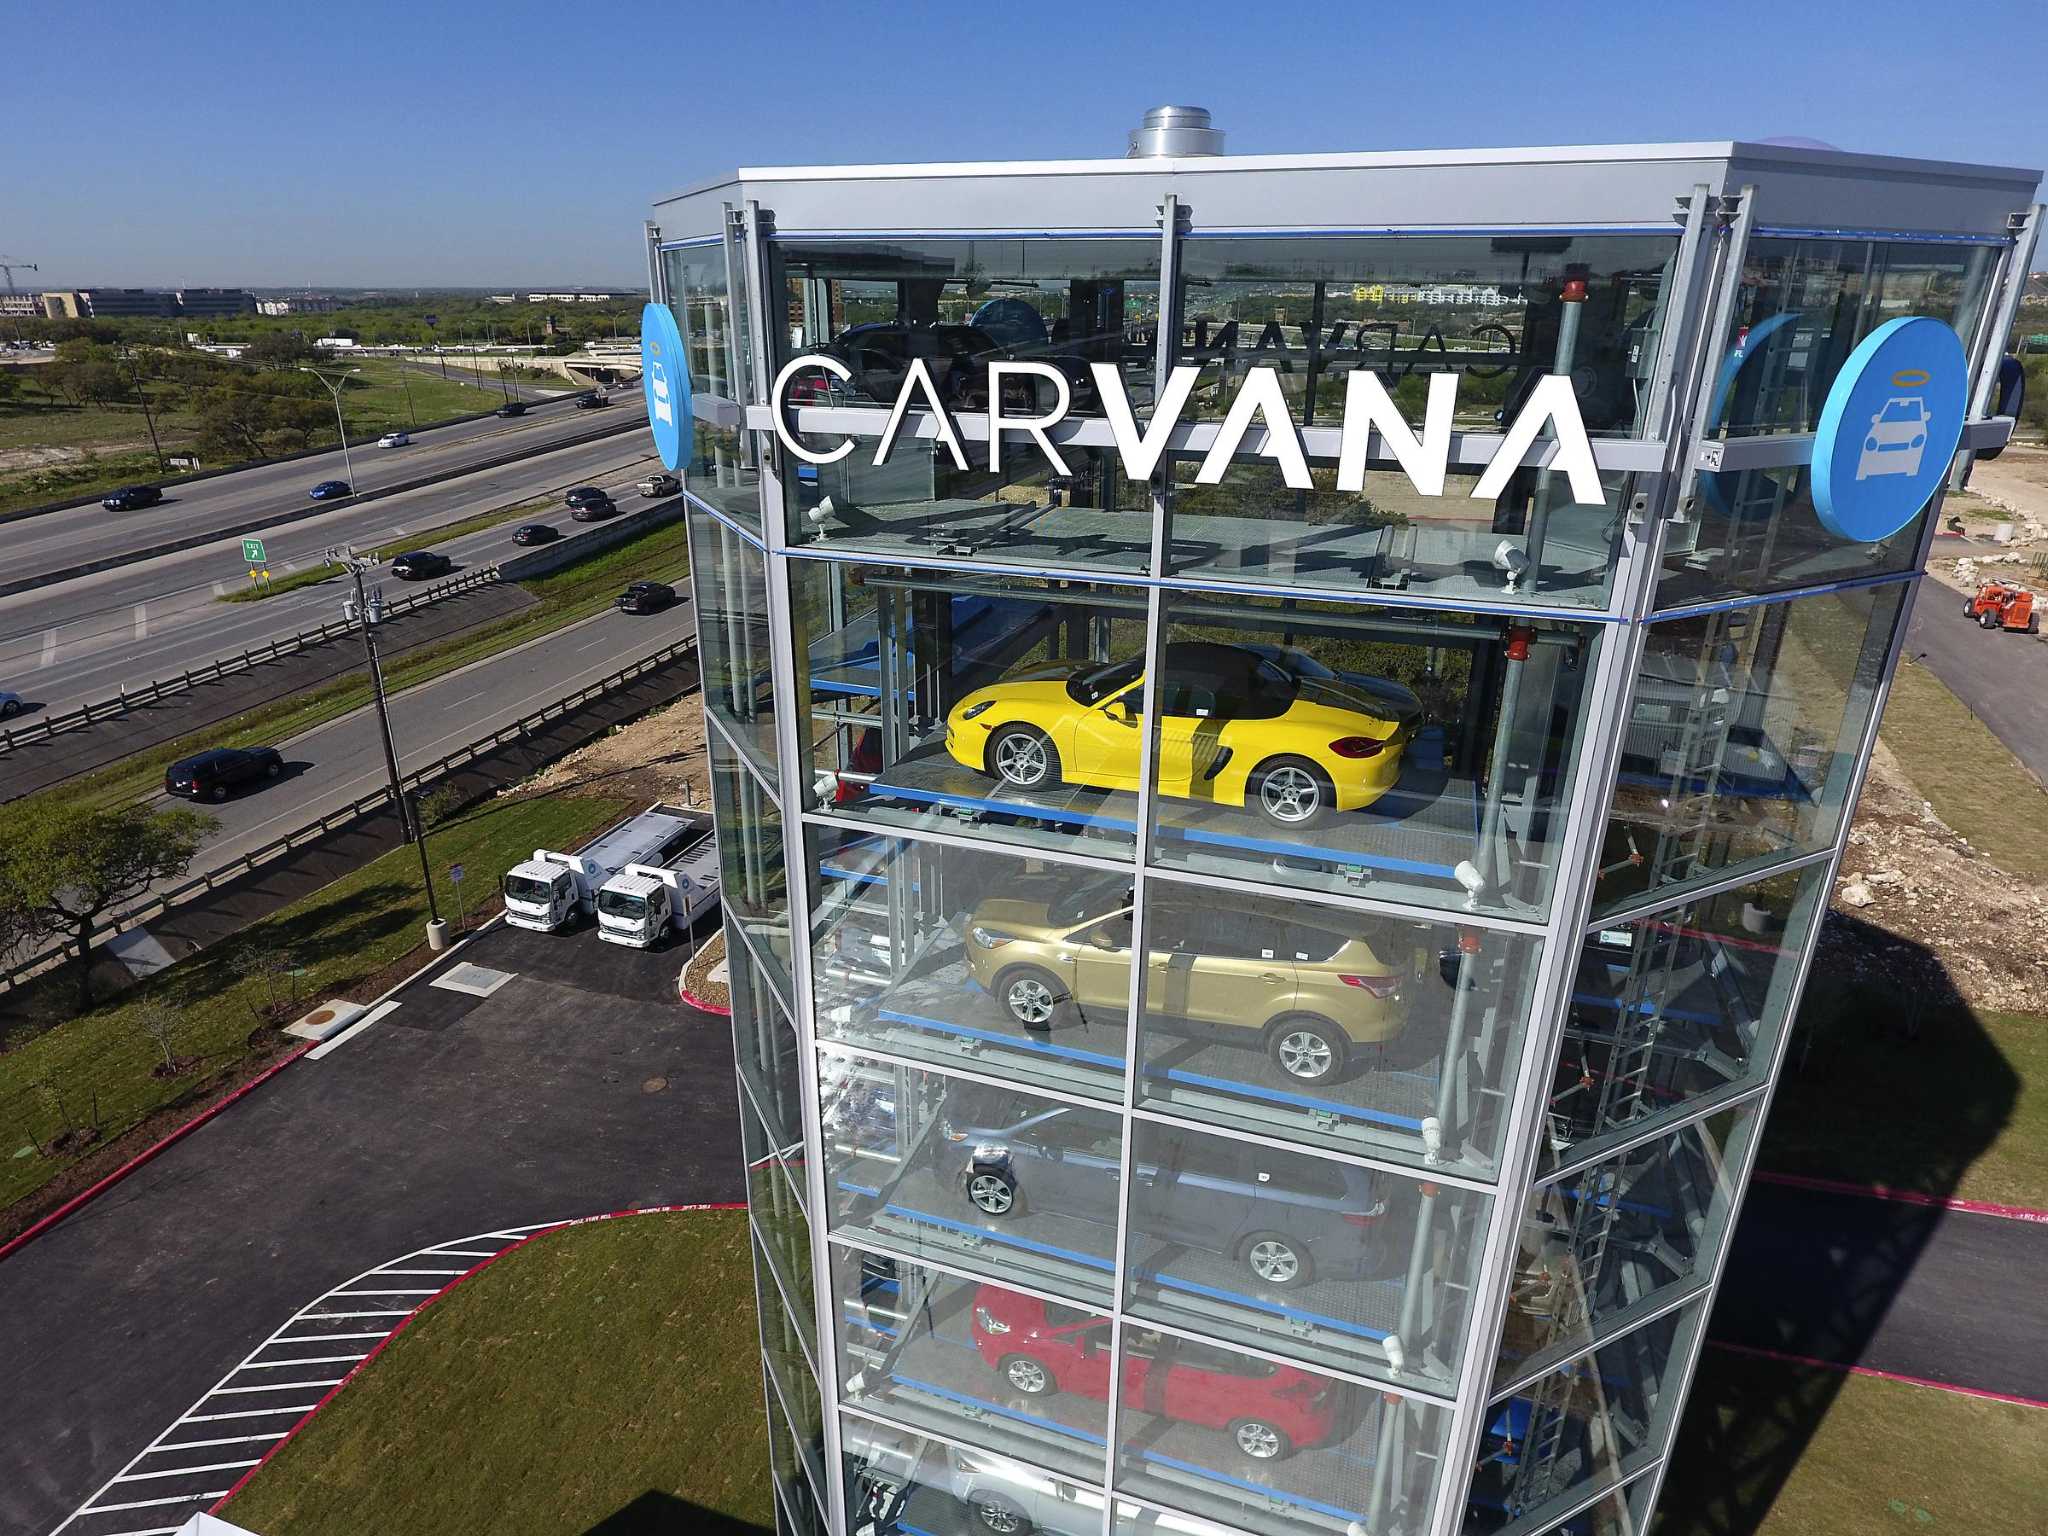 Parking lot building with a huge Carvana Written on it